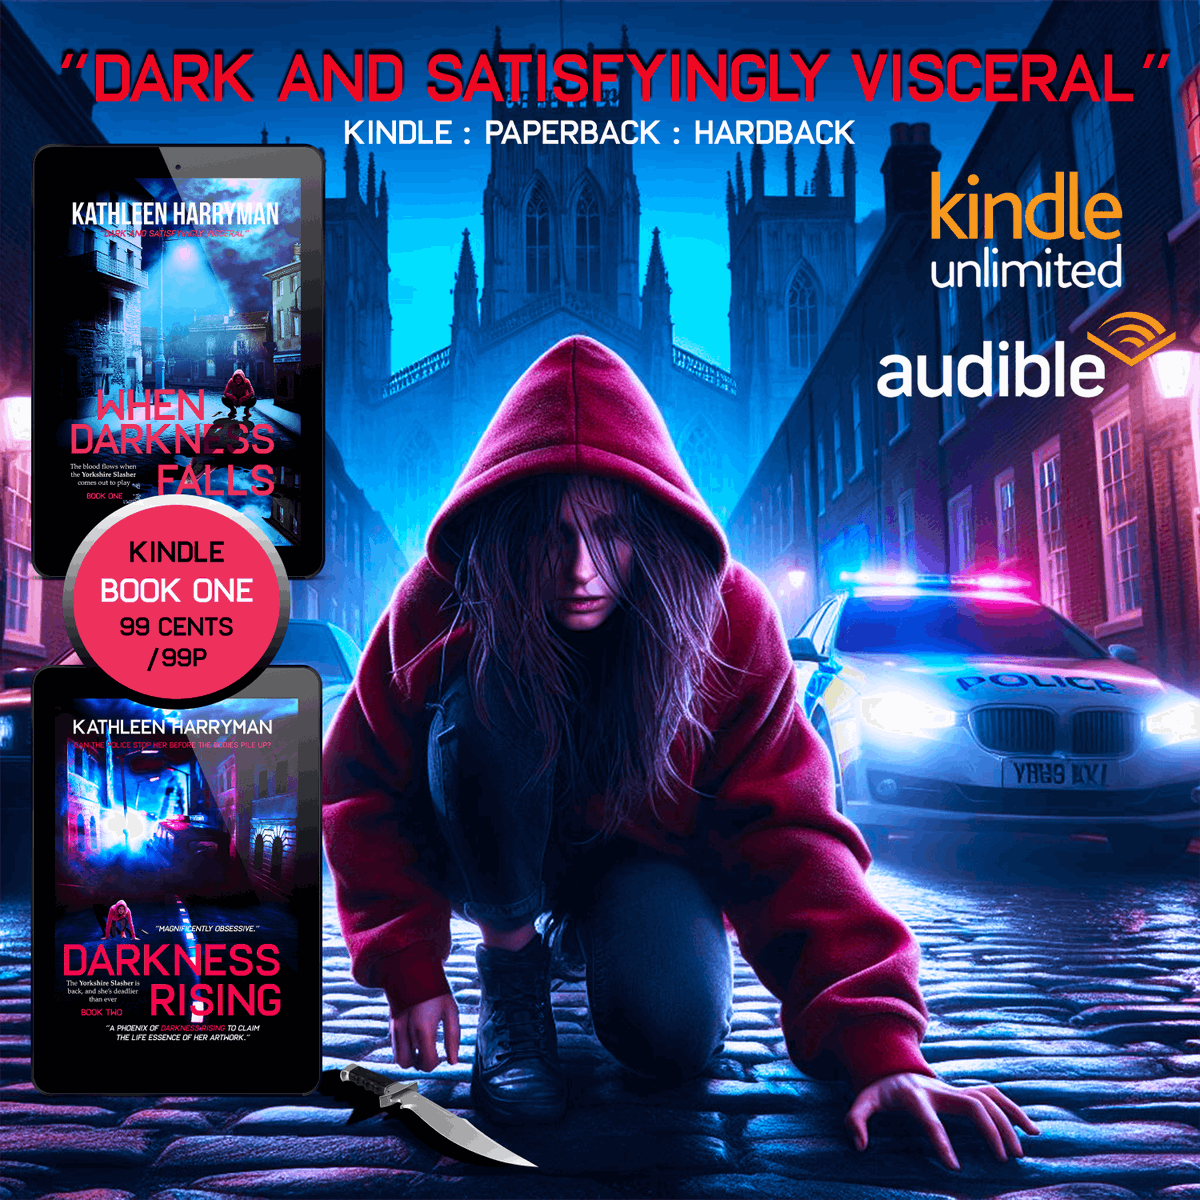 #BookReview 'It's sharp, savage and ruthless, all the while maintaining a touch of vulnerability and pathos.' #KU #Audible #Kindle #Paperback #1 getbook.at/WDF #2 mybook.to/DR-BK2 #1 #Kindle on sale @ #99cents #99p #Thriller #Suspense #BookBoost #Suspense